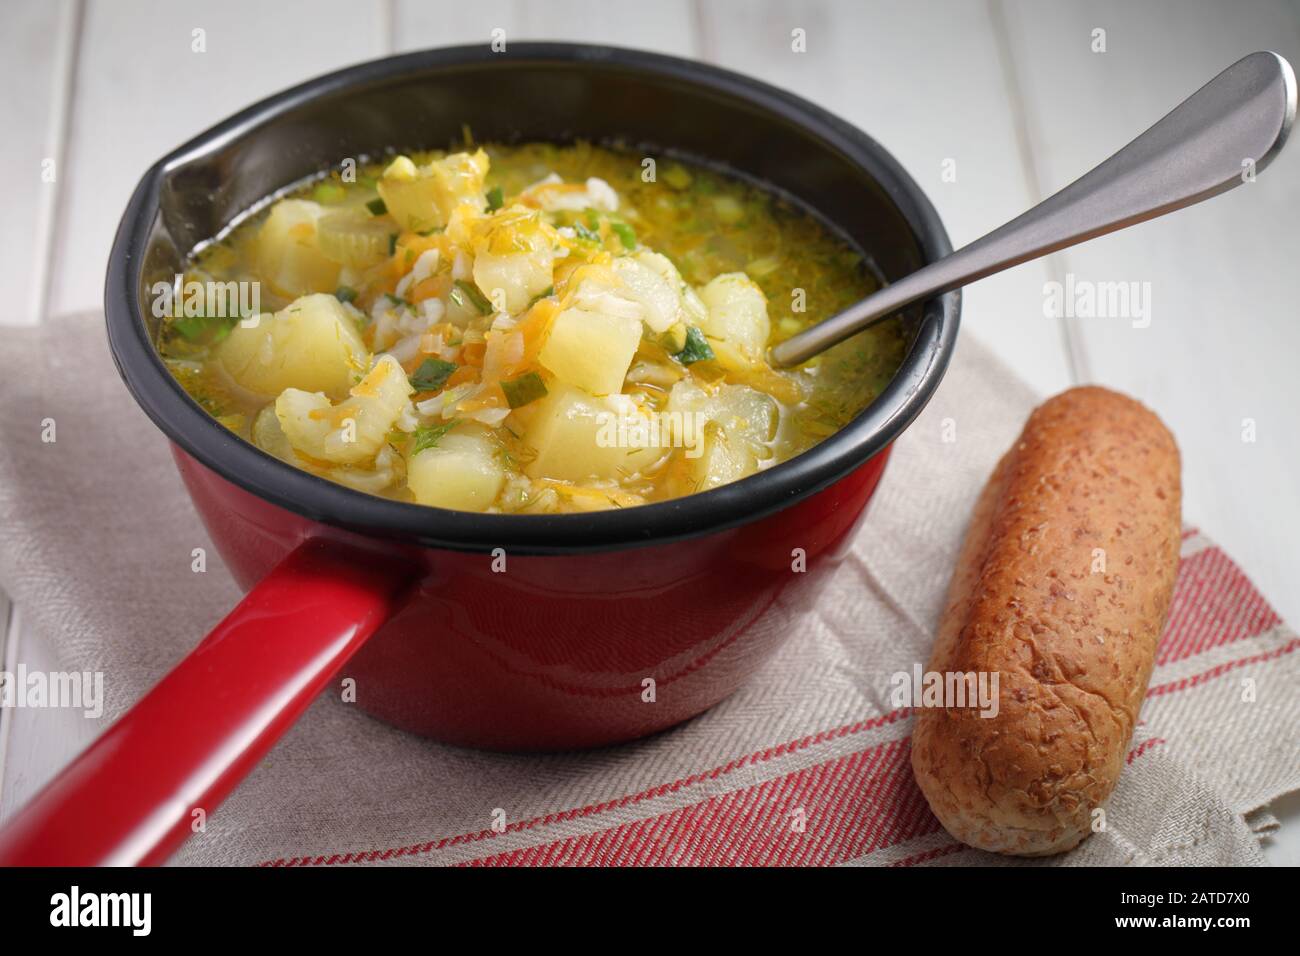 Vegan soup with potato, celery, carrot, rice, and green onion in a red saucepan Stock Photo